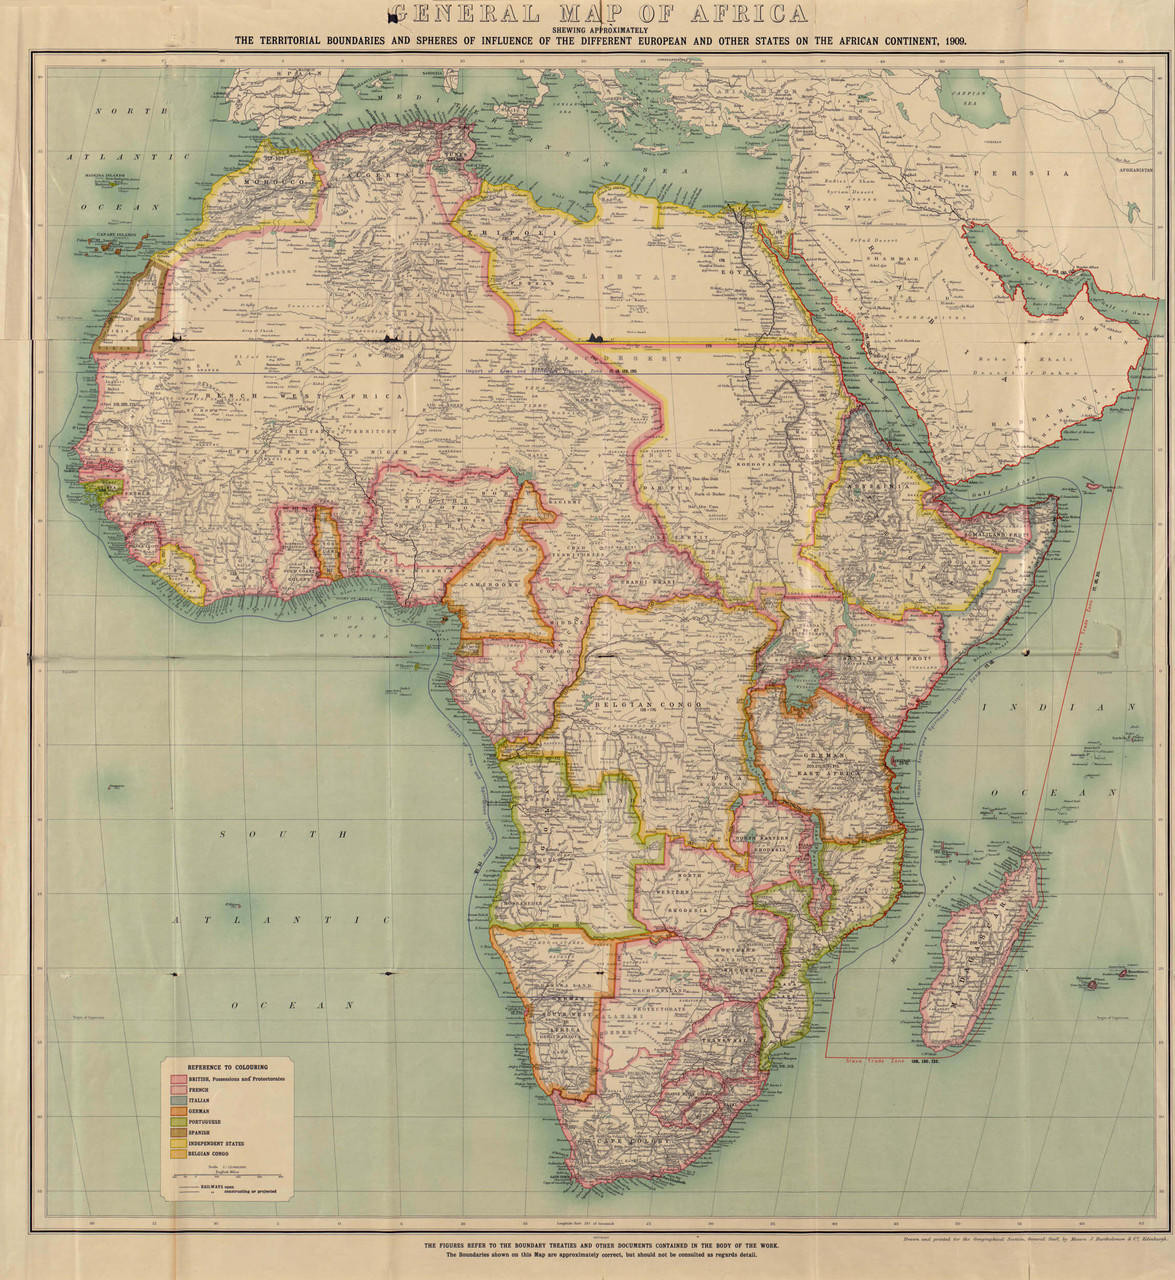 spheres of influence africa